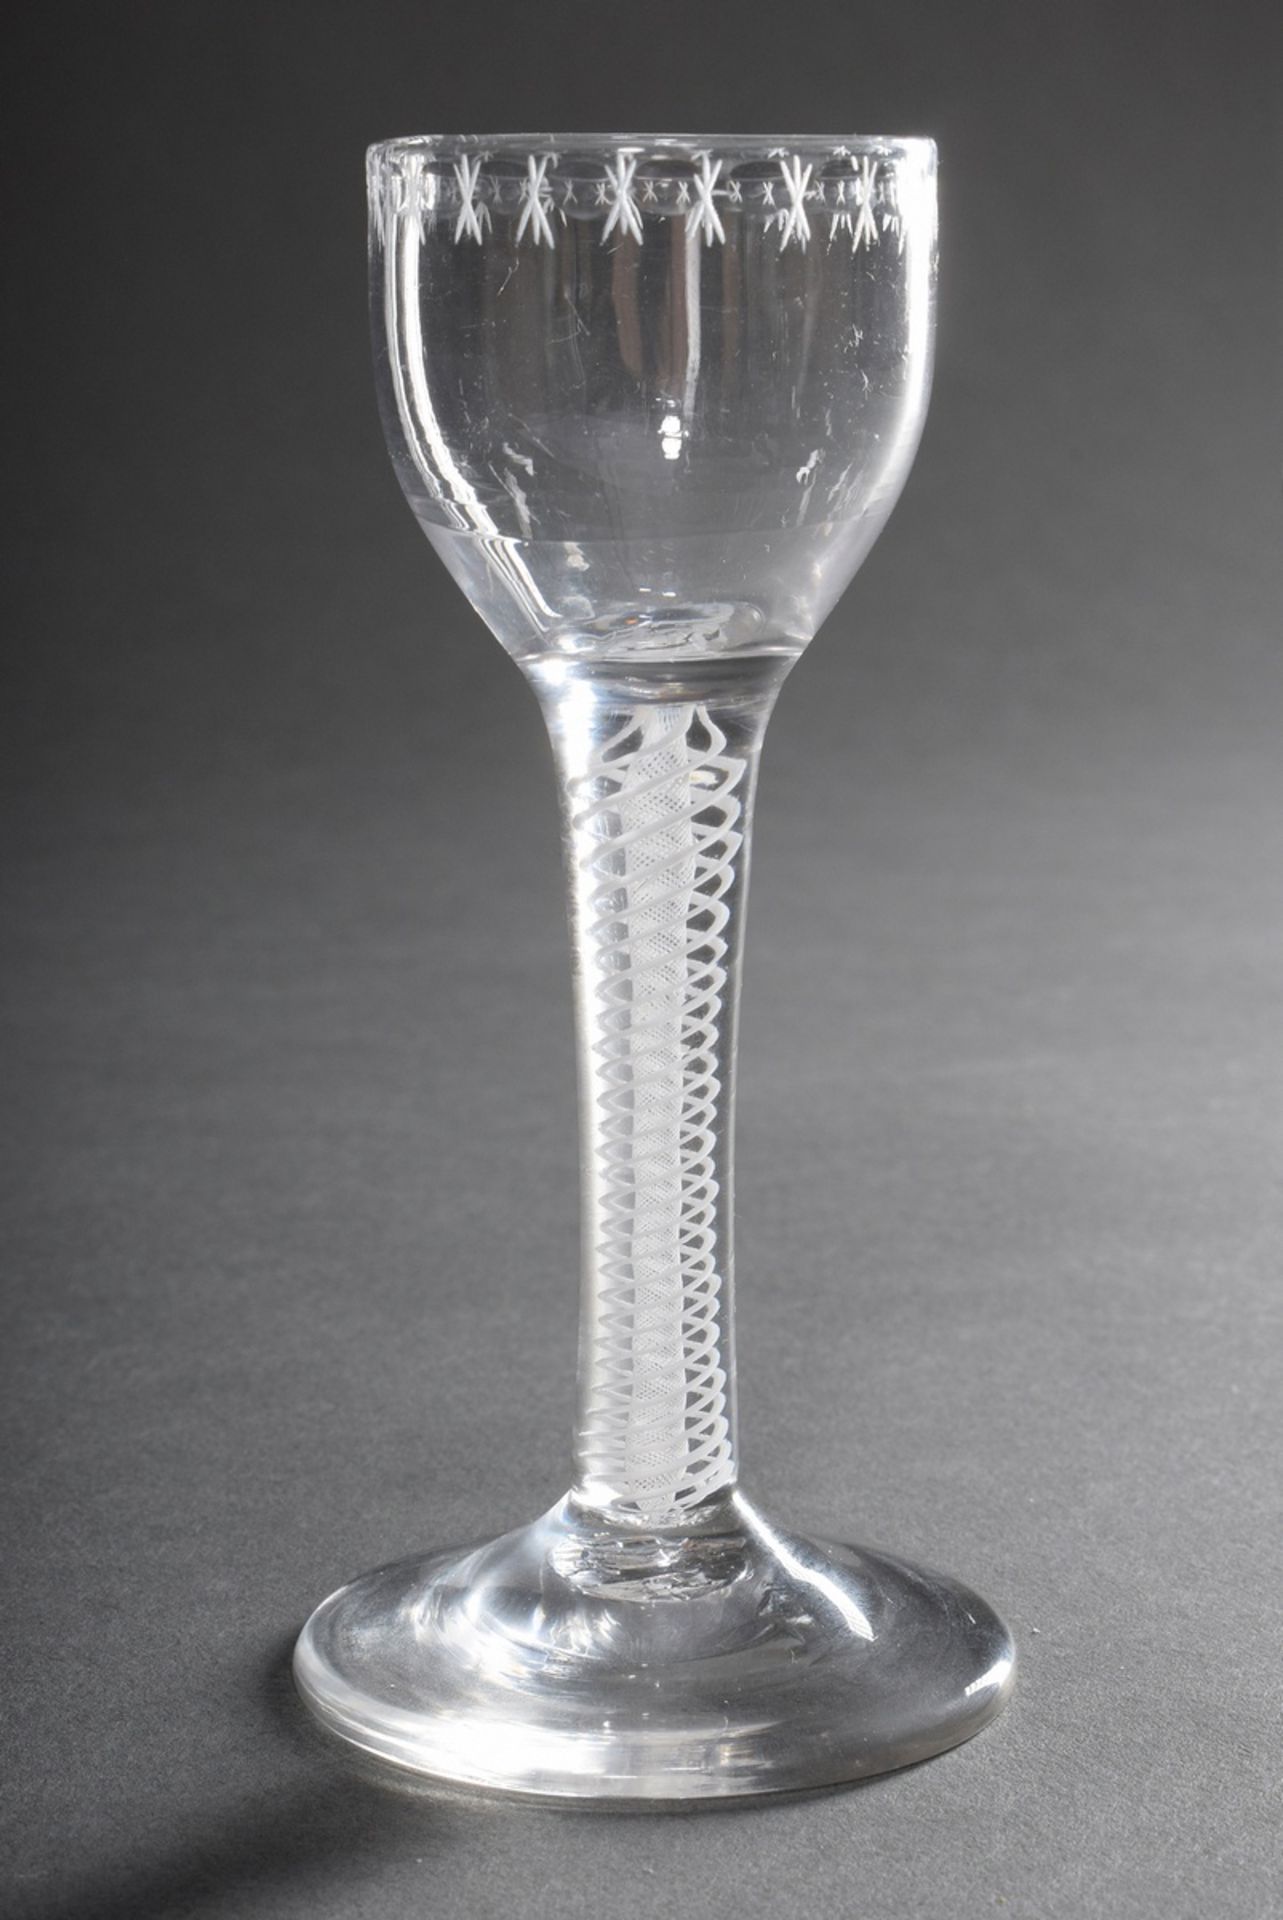 Small snaps glass with white twisted threads in the stem and delicate cut leaf border on the dome, 